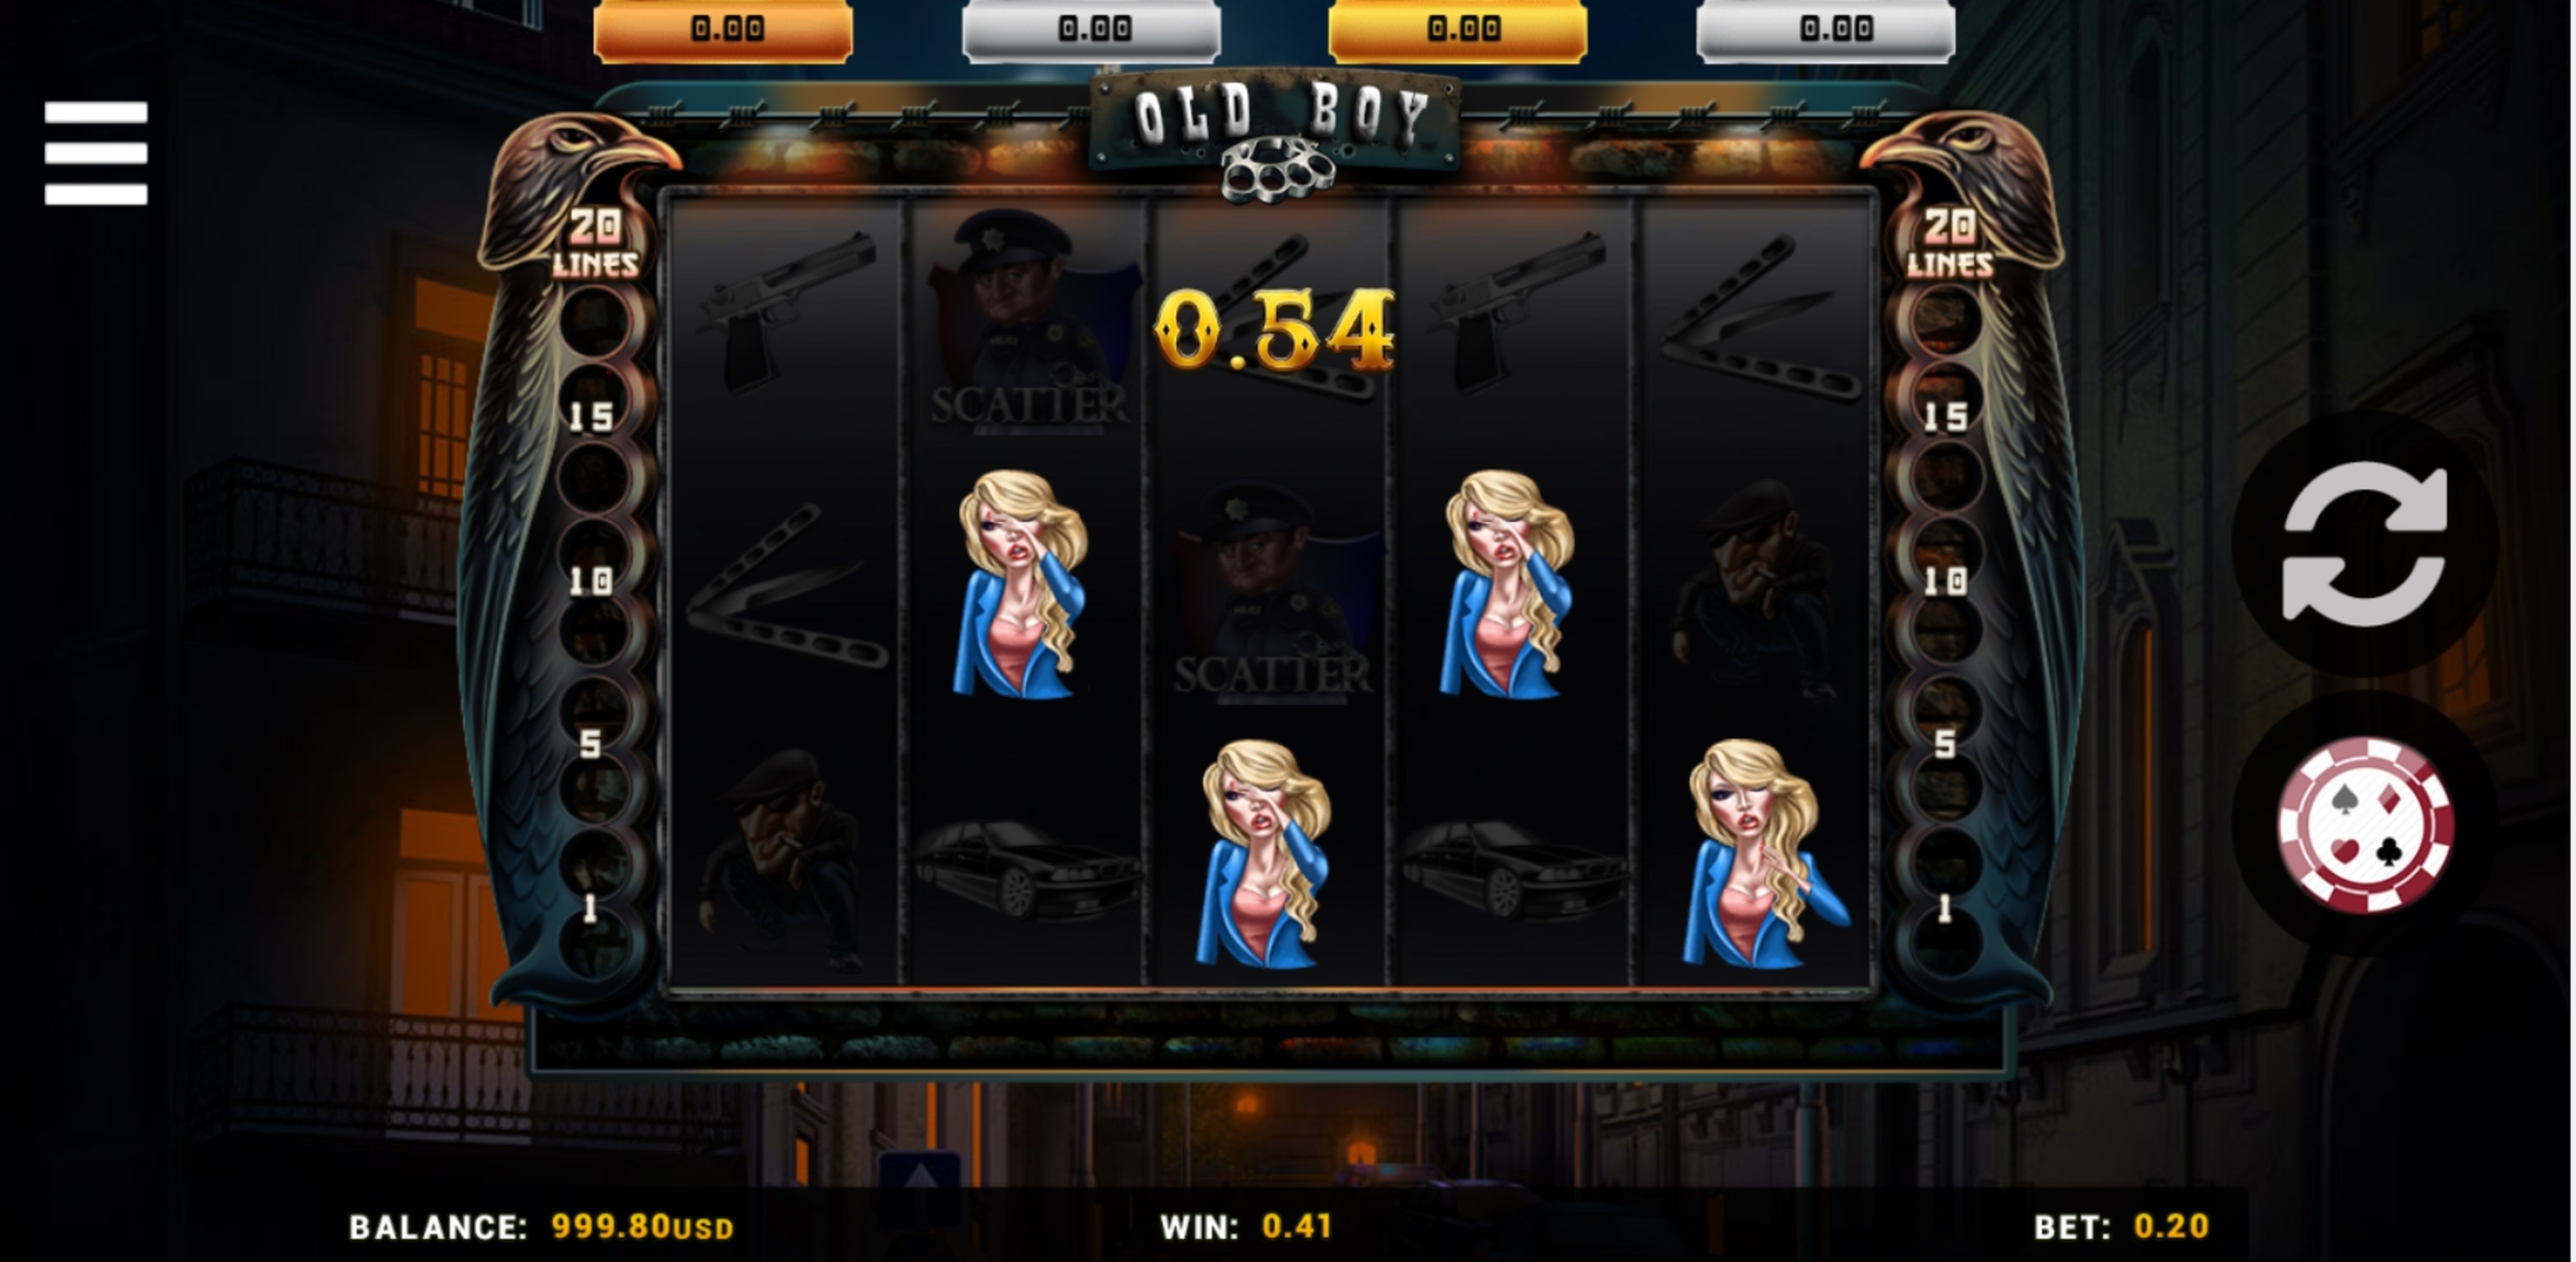 Win Money in Old Boy Free Slot Game by Betsense